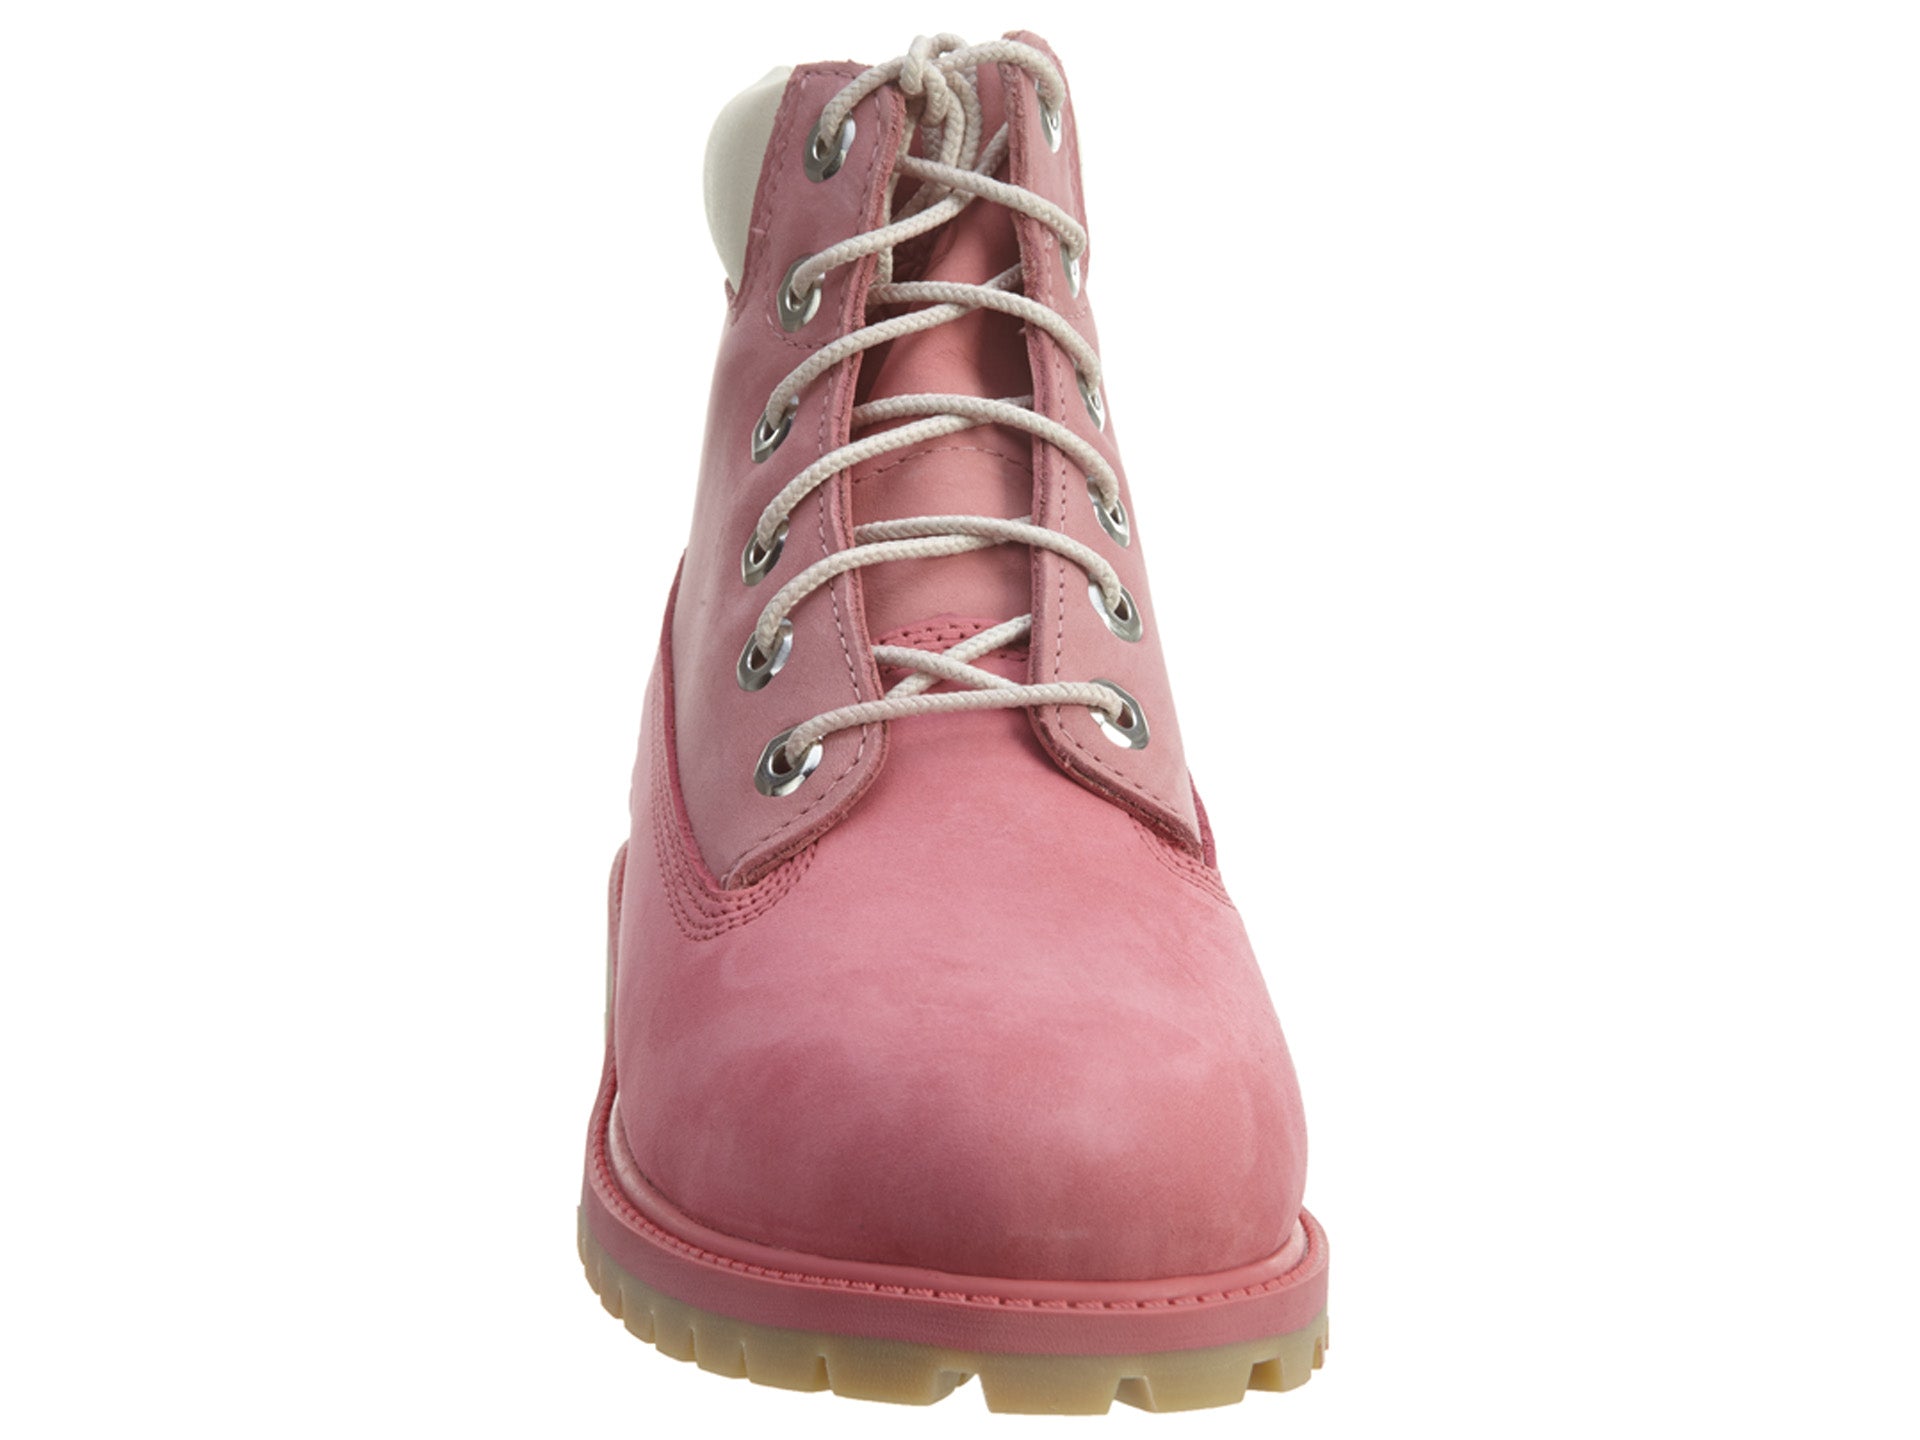 Timberland 6in Classic Premium Boots Big Kids Style : Tb0a14yf